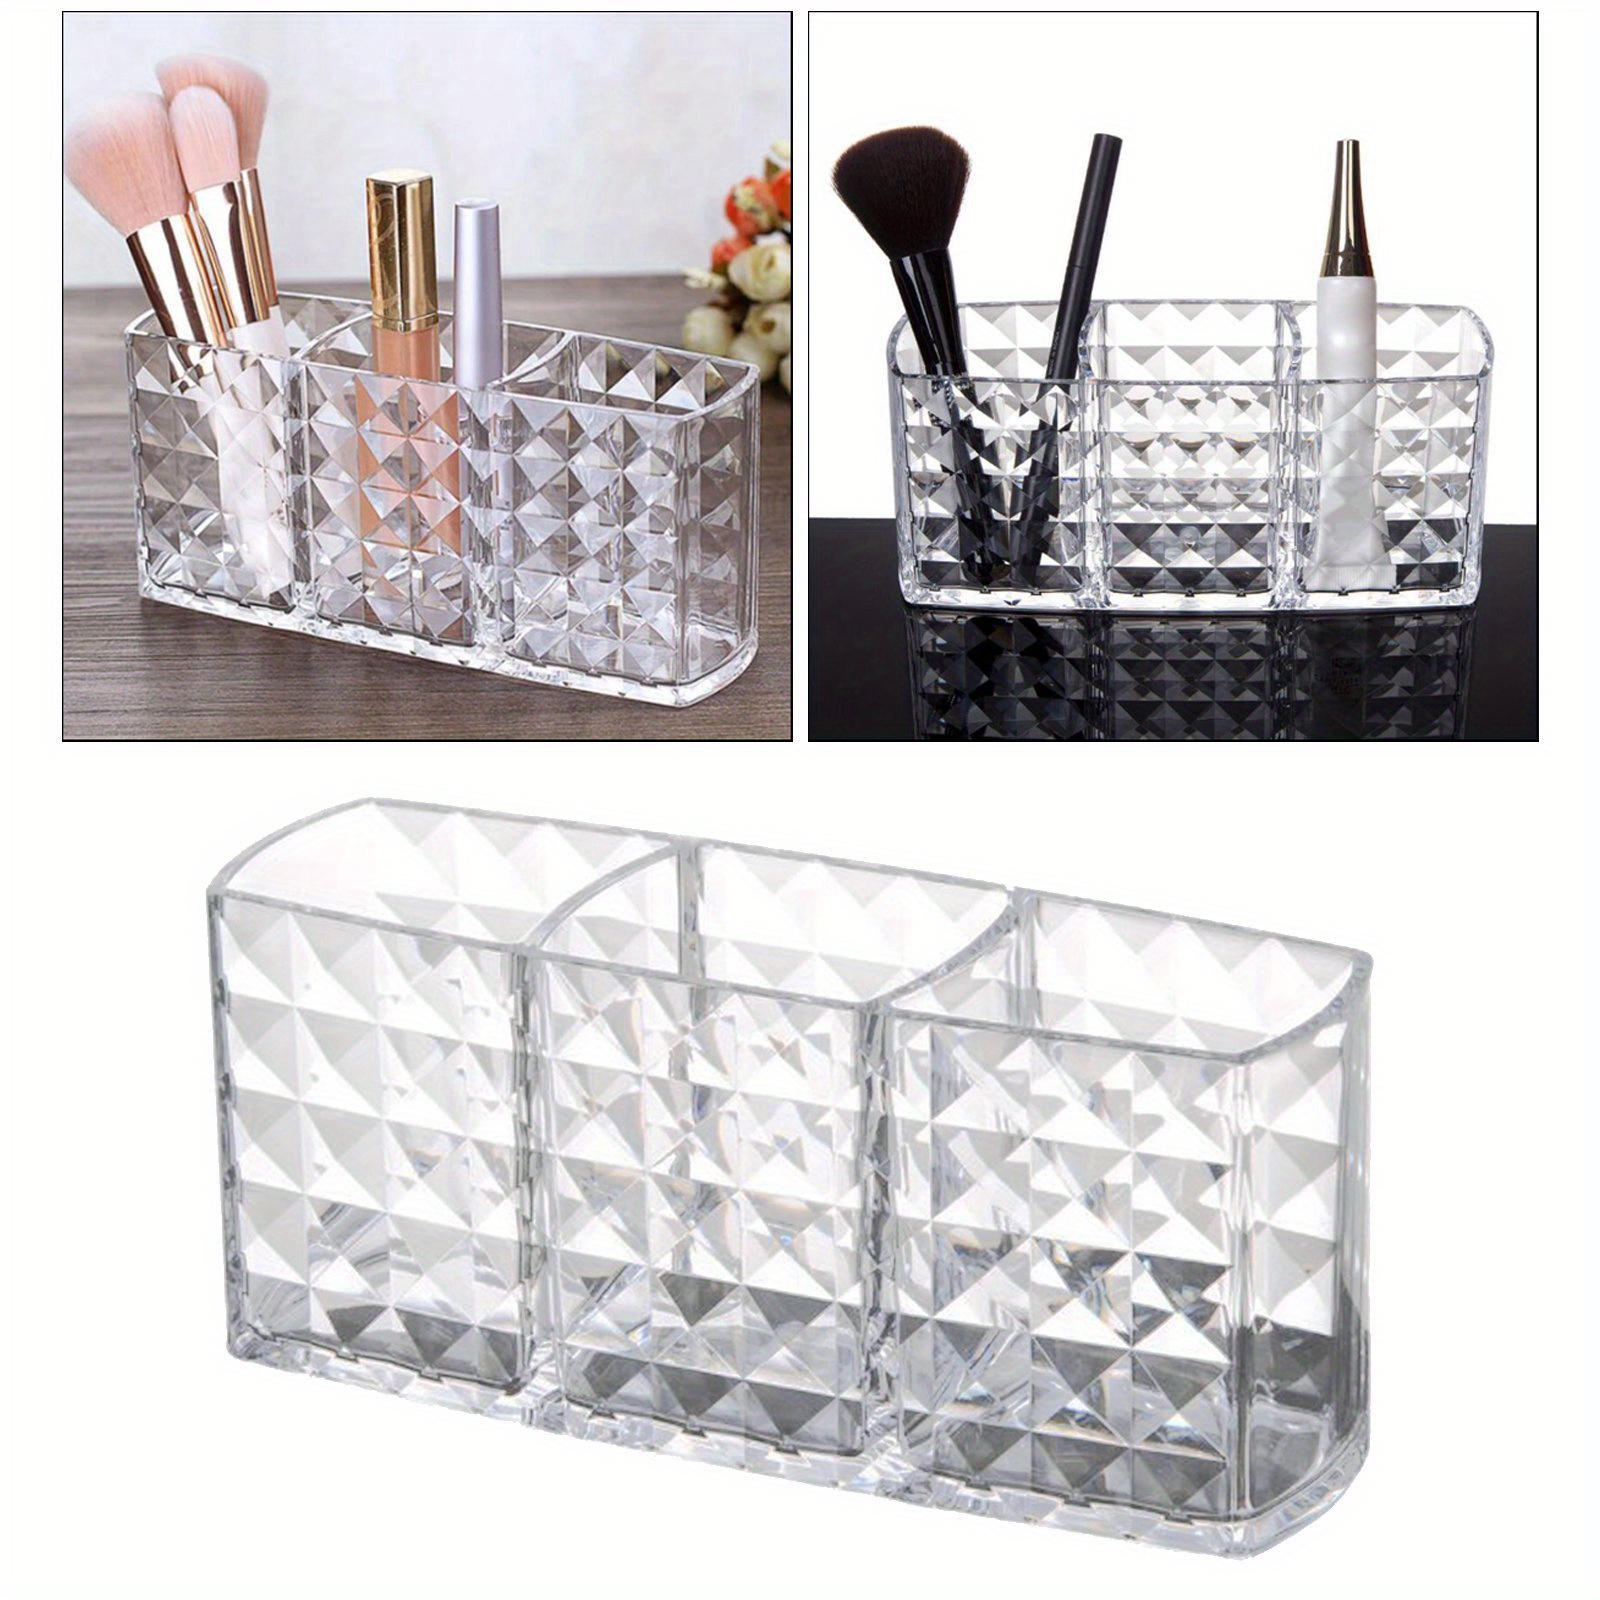 CQ Acrylic 3 Slot Acrylic Makeup Brush Holder and Face Brushes Organizer ,5.3x5.3x4.7inch,pack of 1